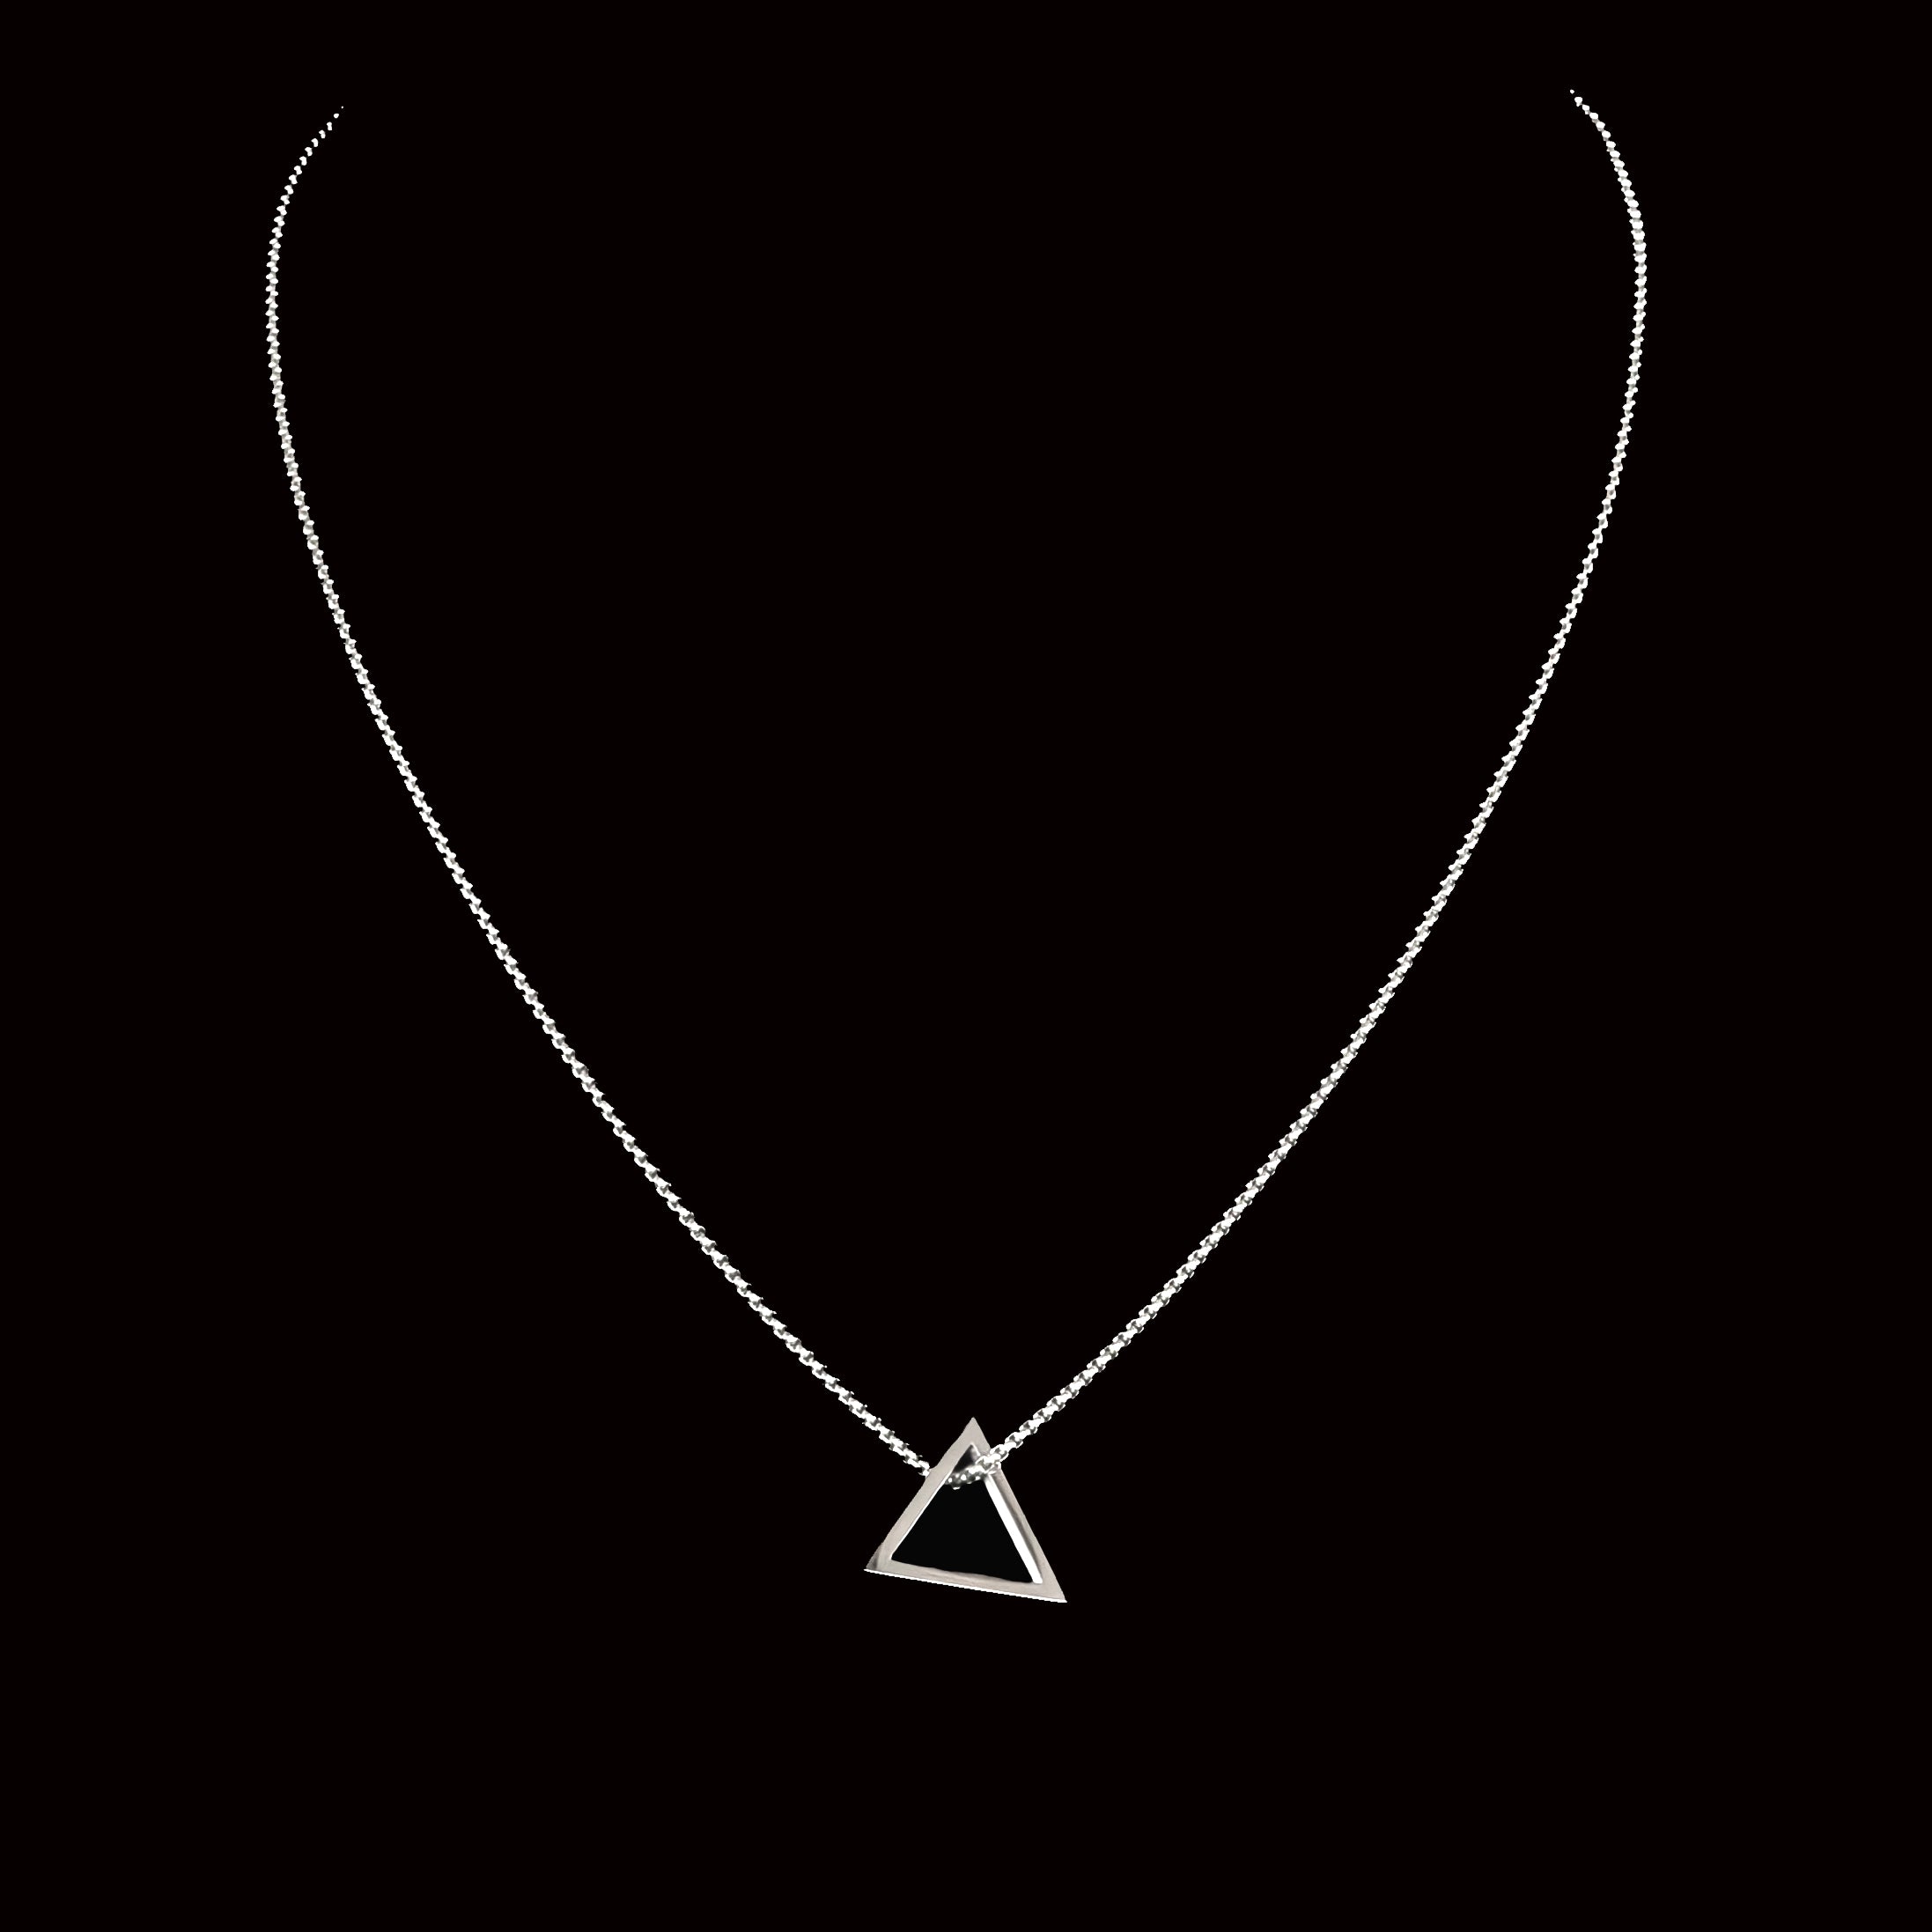 Kash Stainless Steel Necklace with Triangle Pendant